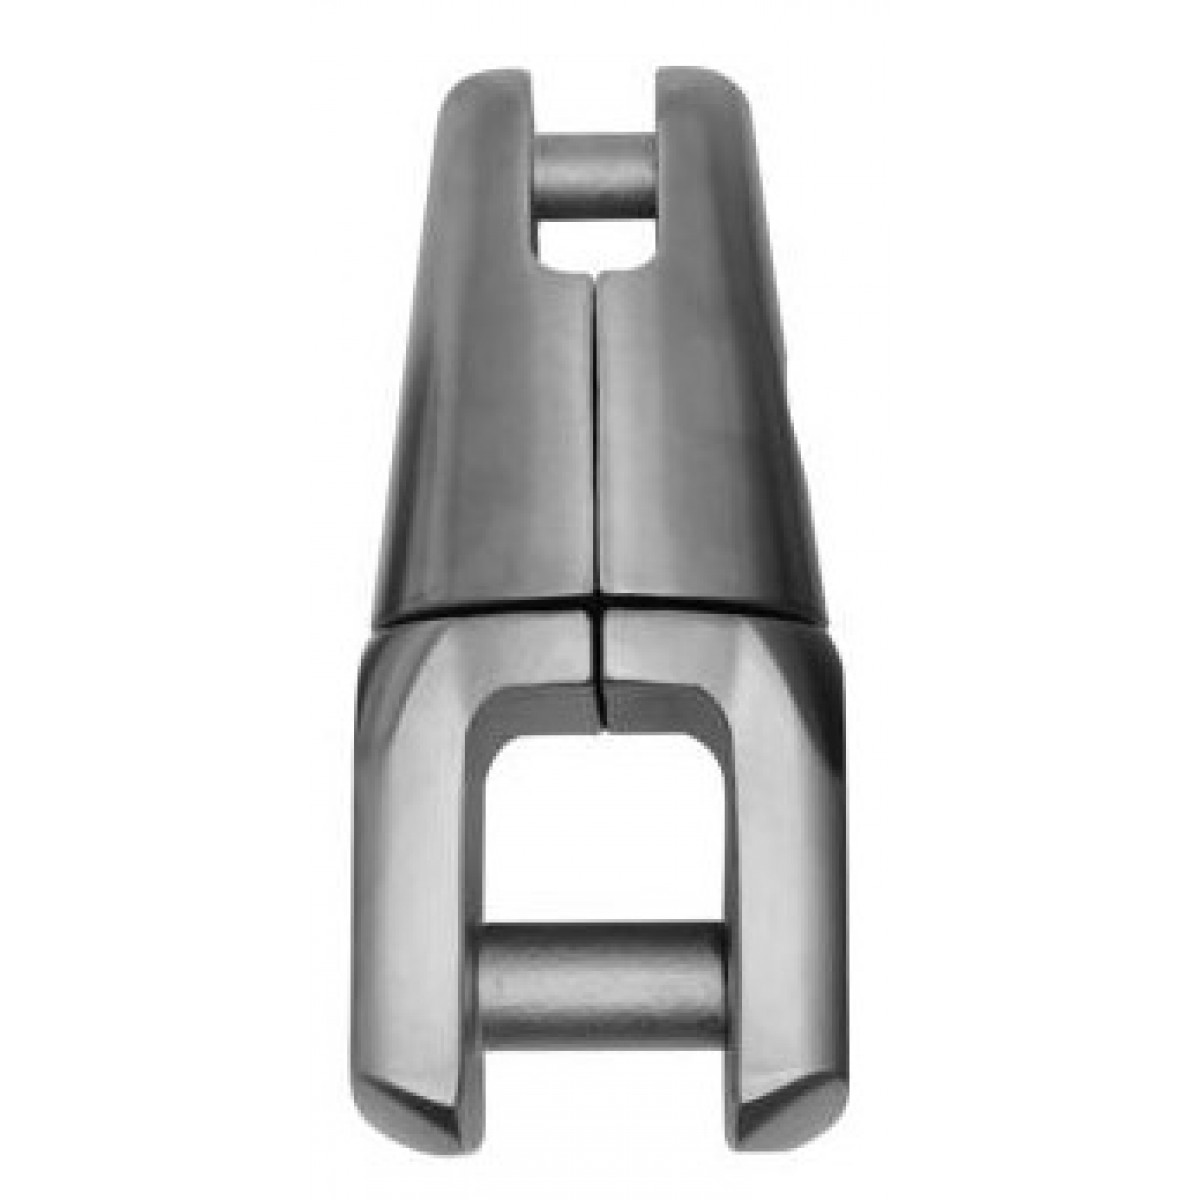 Anchor Swivel Connector Stainless Steel - CA644.08